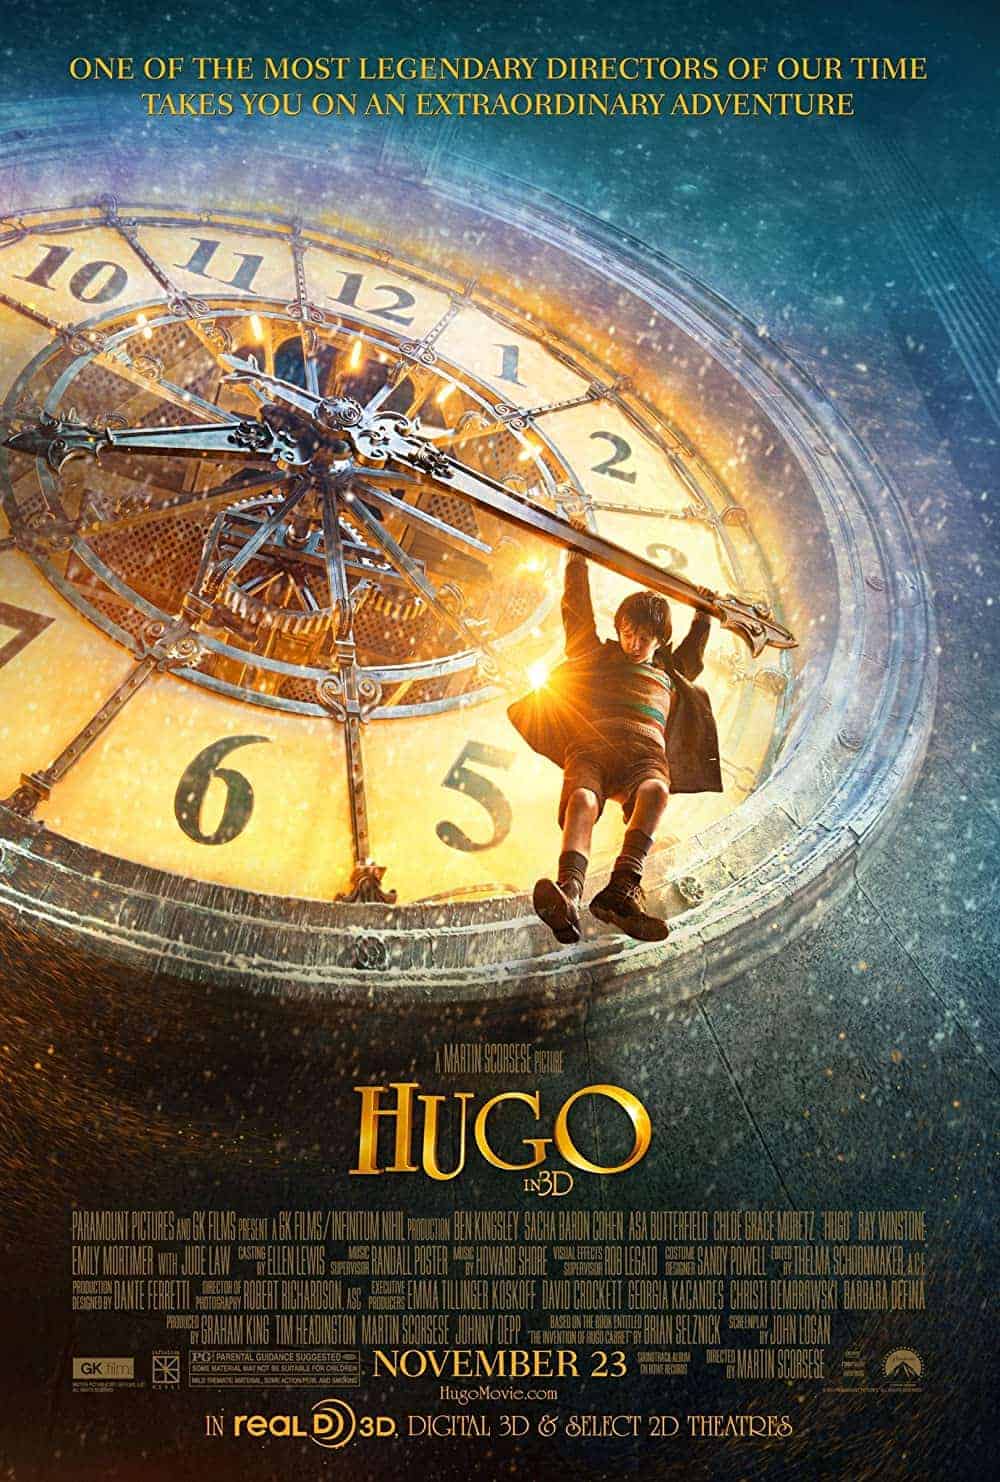 Hugo (2011) 15 Best Steampunk Movies to Check Out